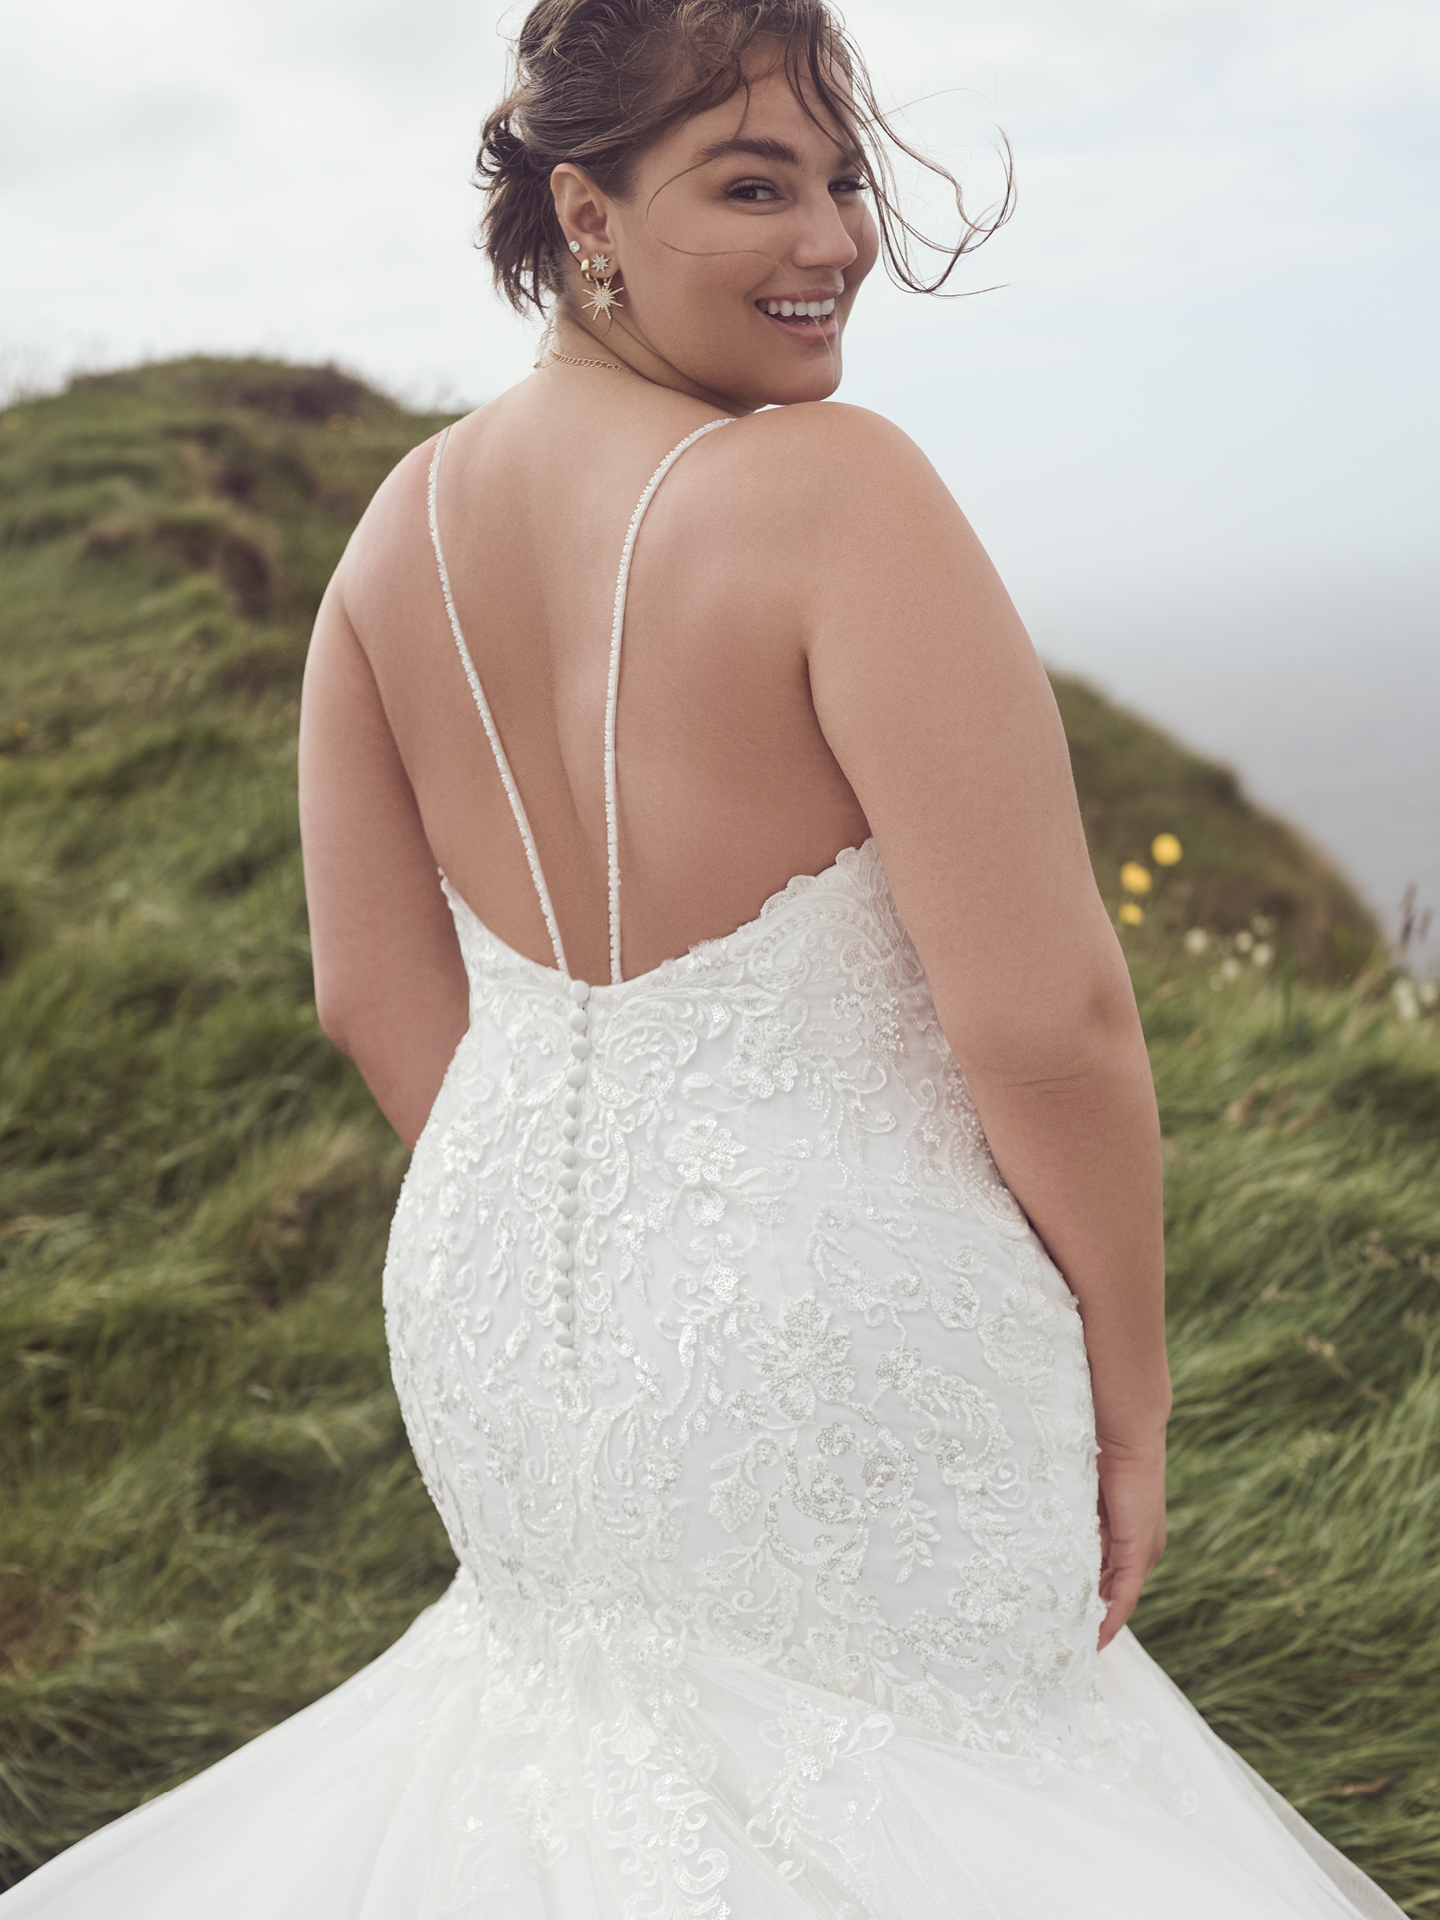 Plus Size Bride In Backless Wedding Dress Called Beatrice By Rebecca Ingram